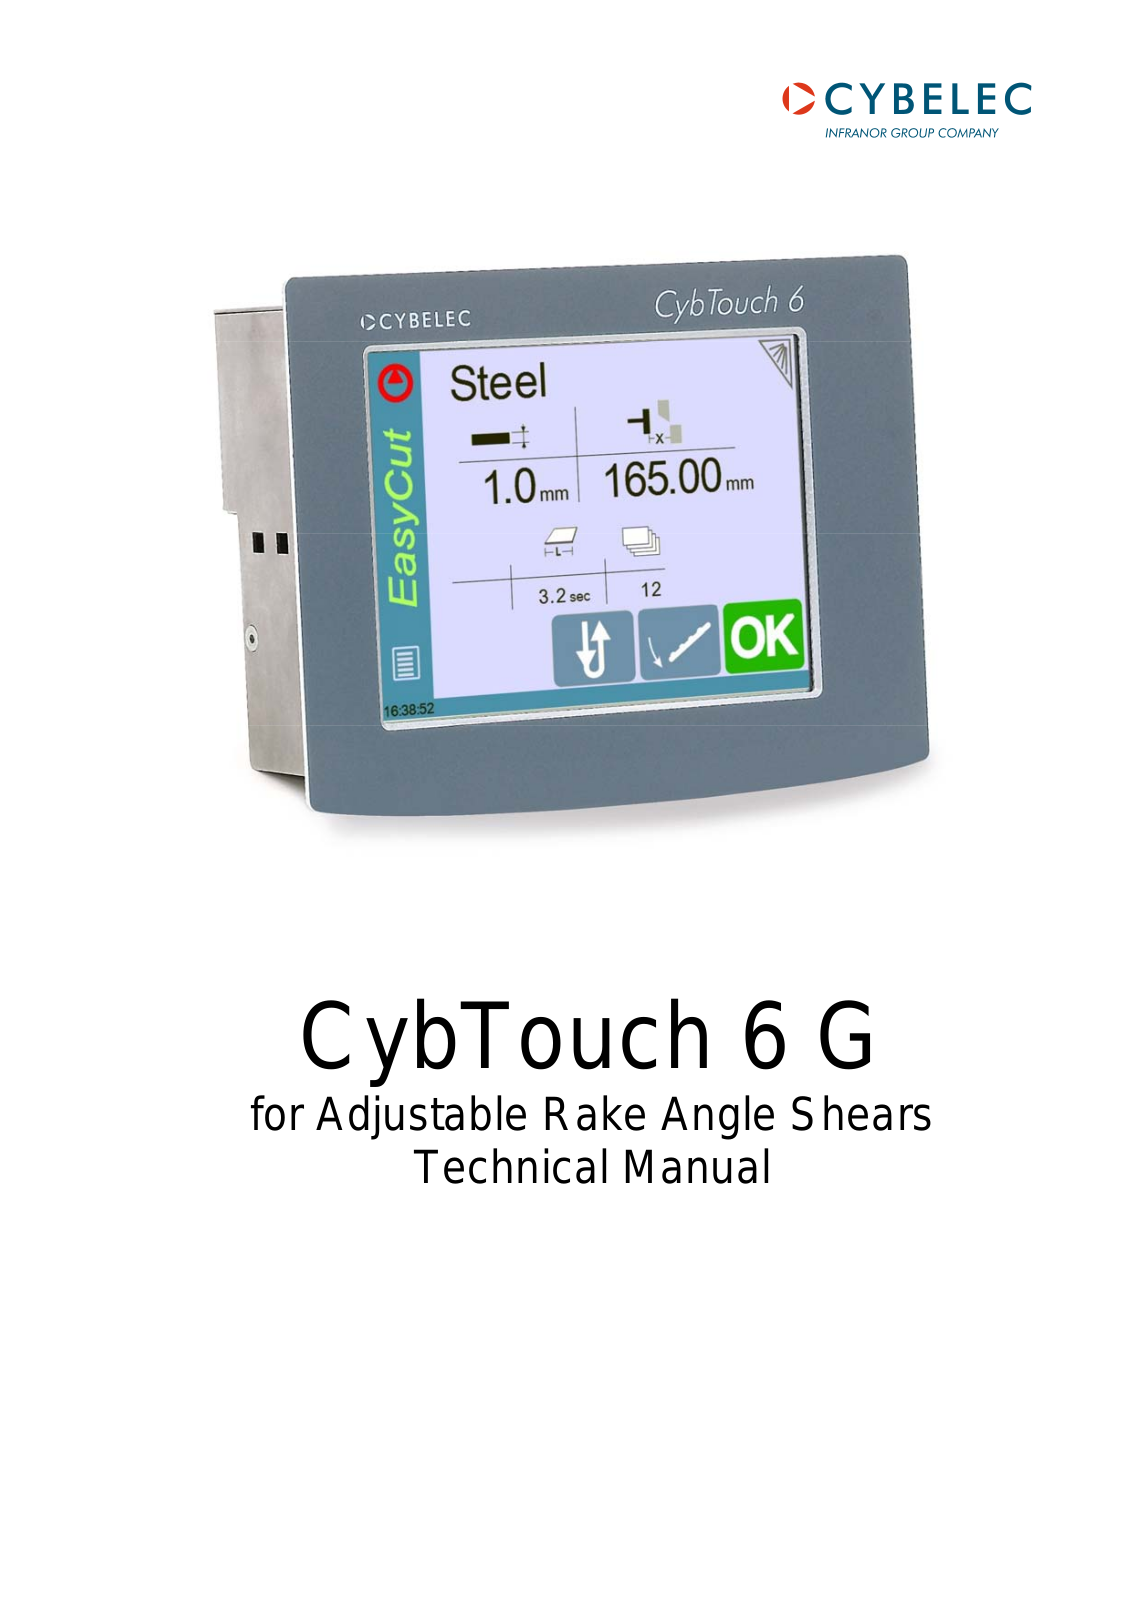 cybelec CybTouch 6G Technical Manual